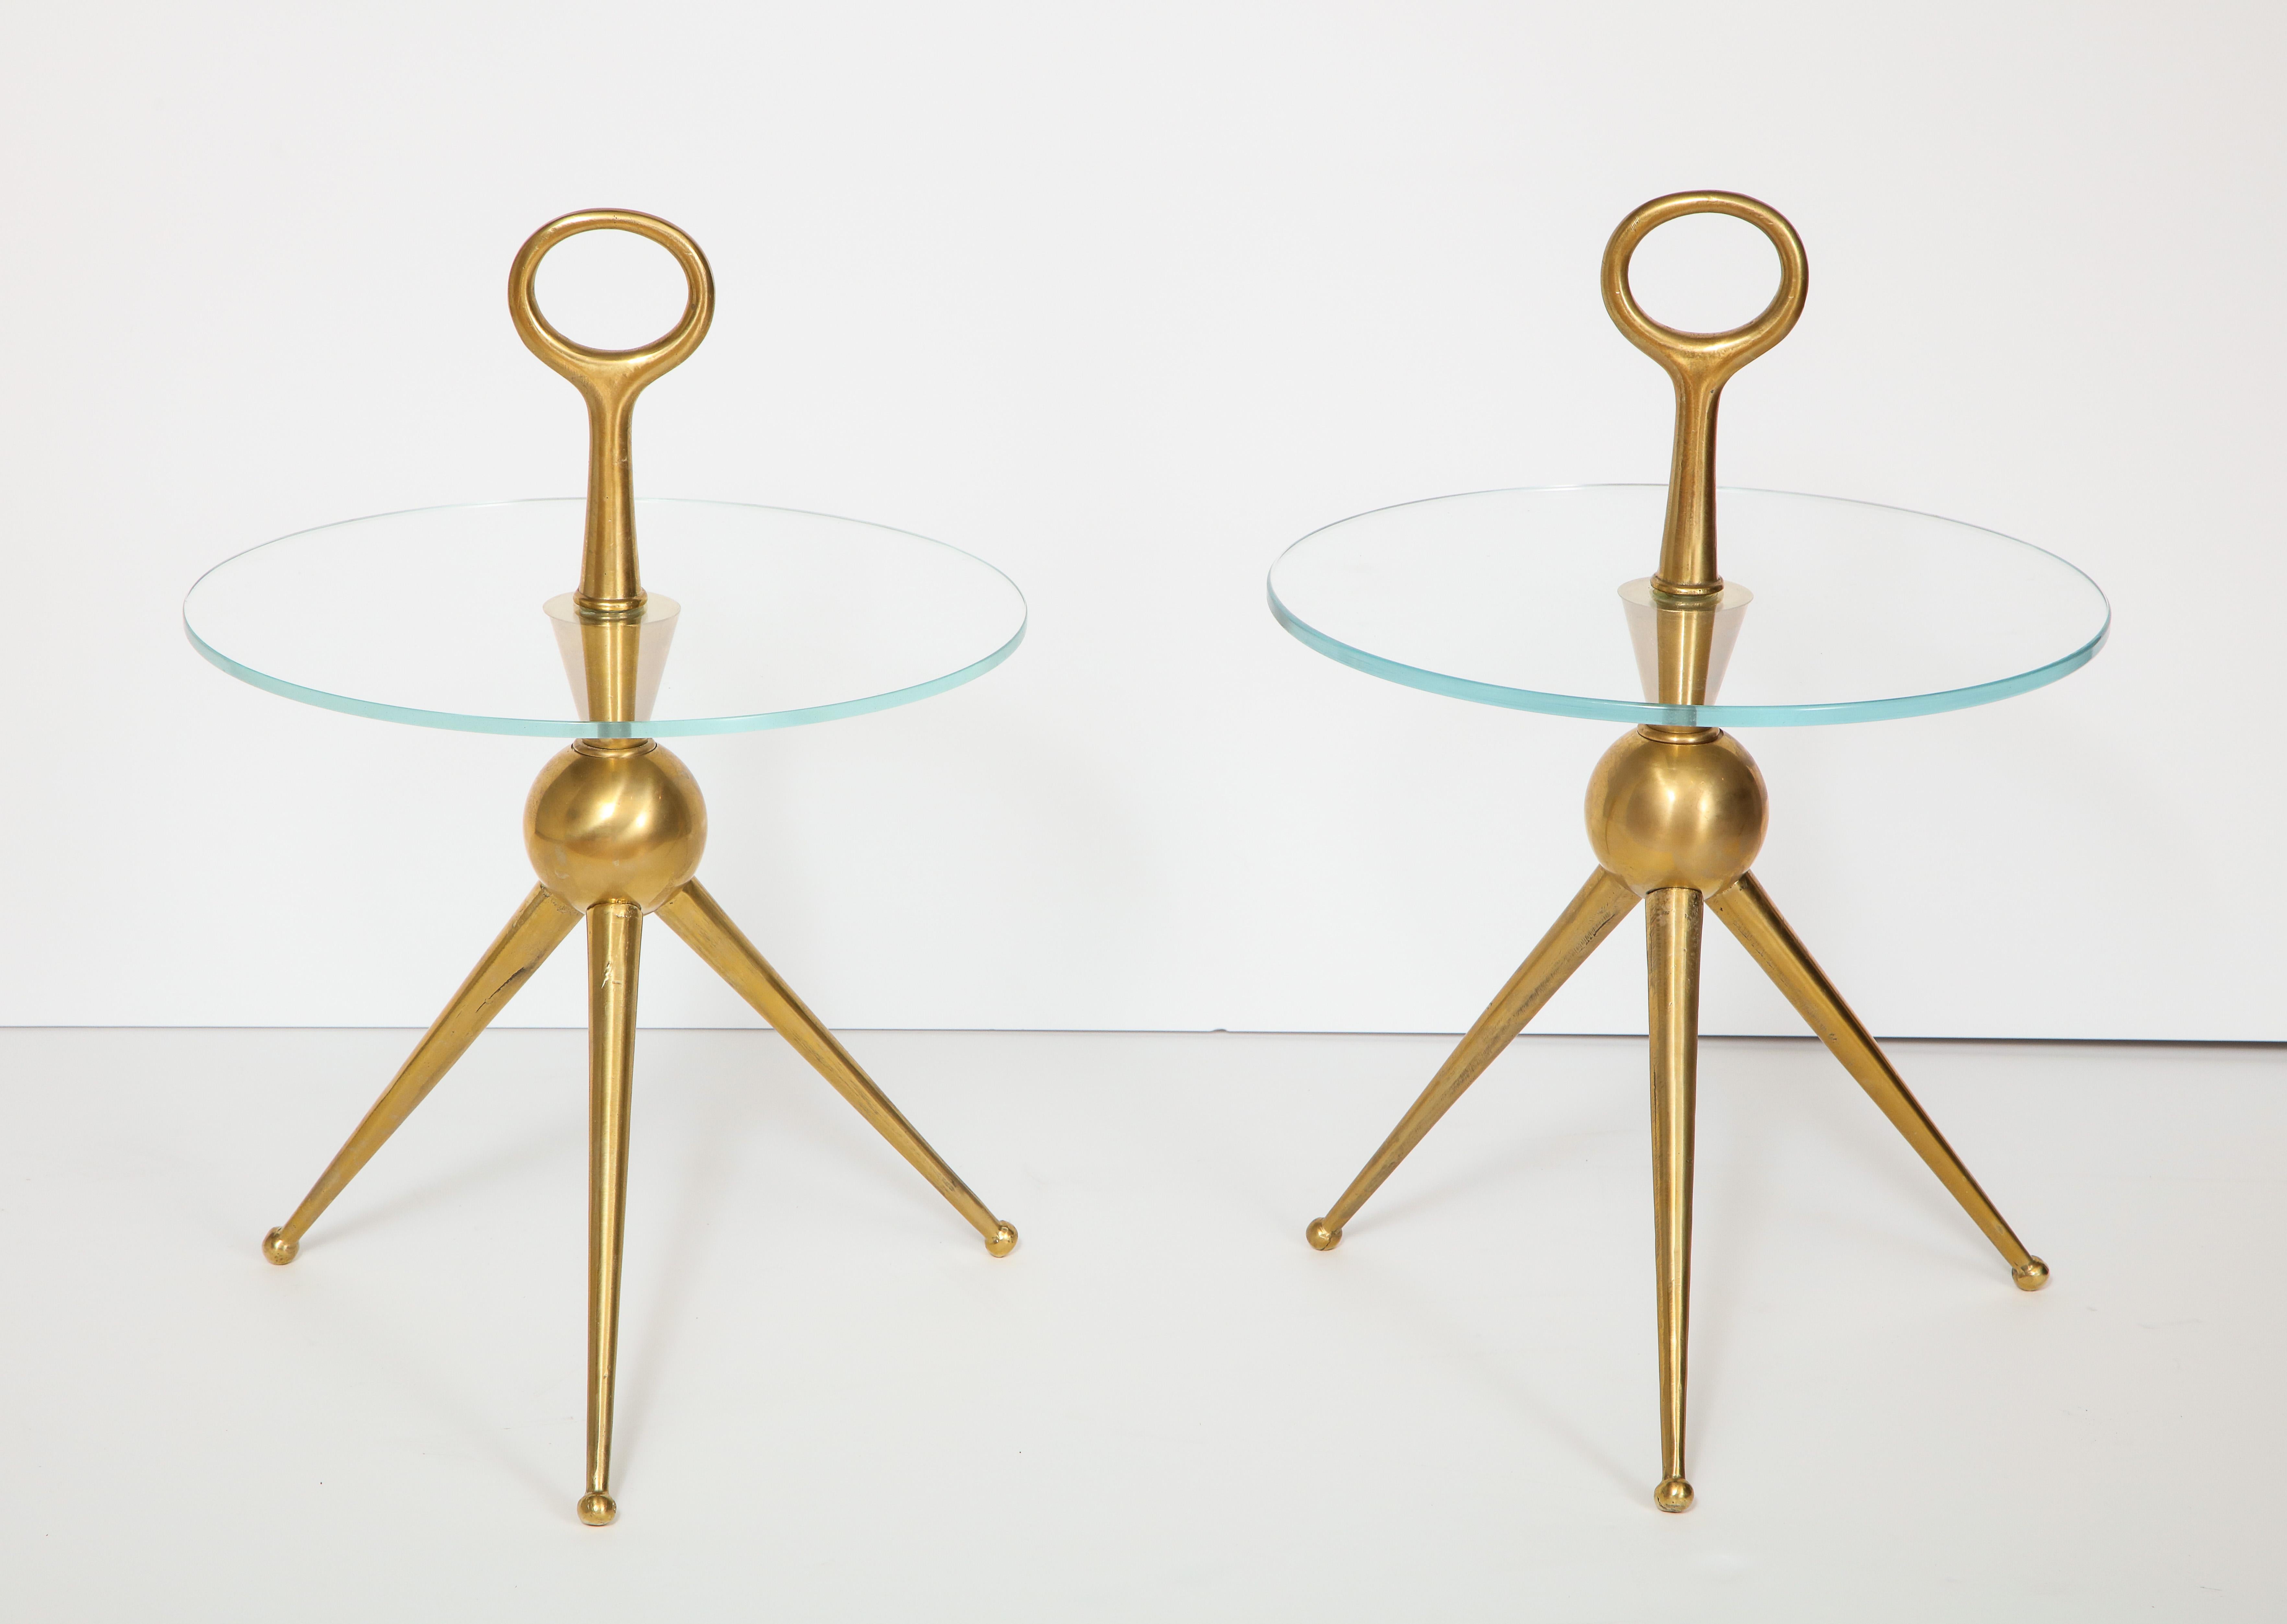 Pair of Italian bronze martini side tables with clear round glass tops. Tripod base and with eyehook handle. Handcrafted in Florence of solid bronze. A work of art. Overall height of table, including handle is 23